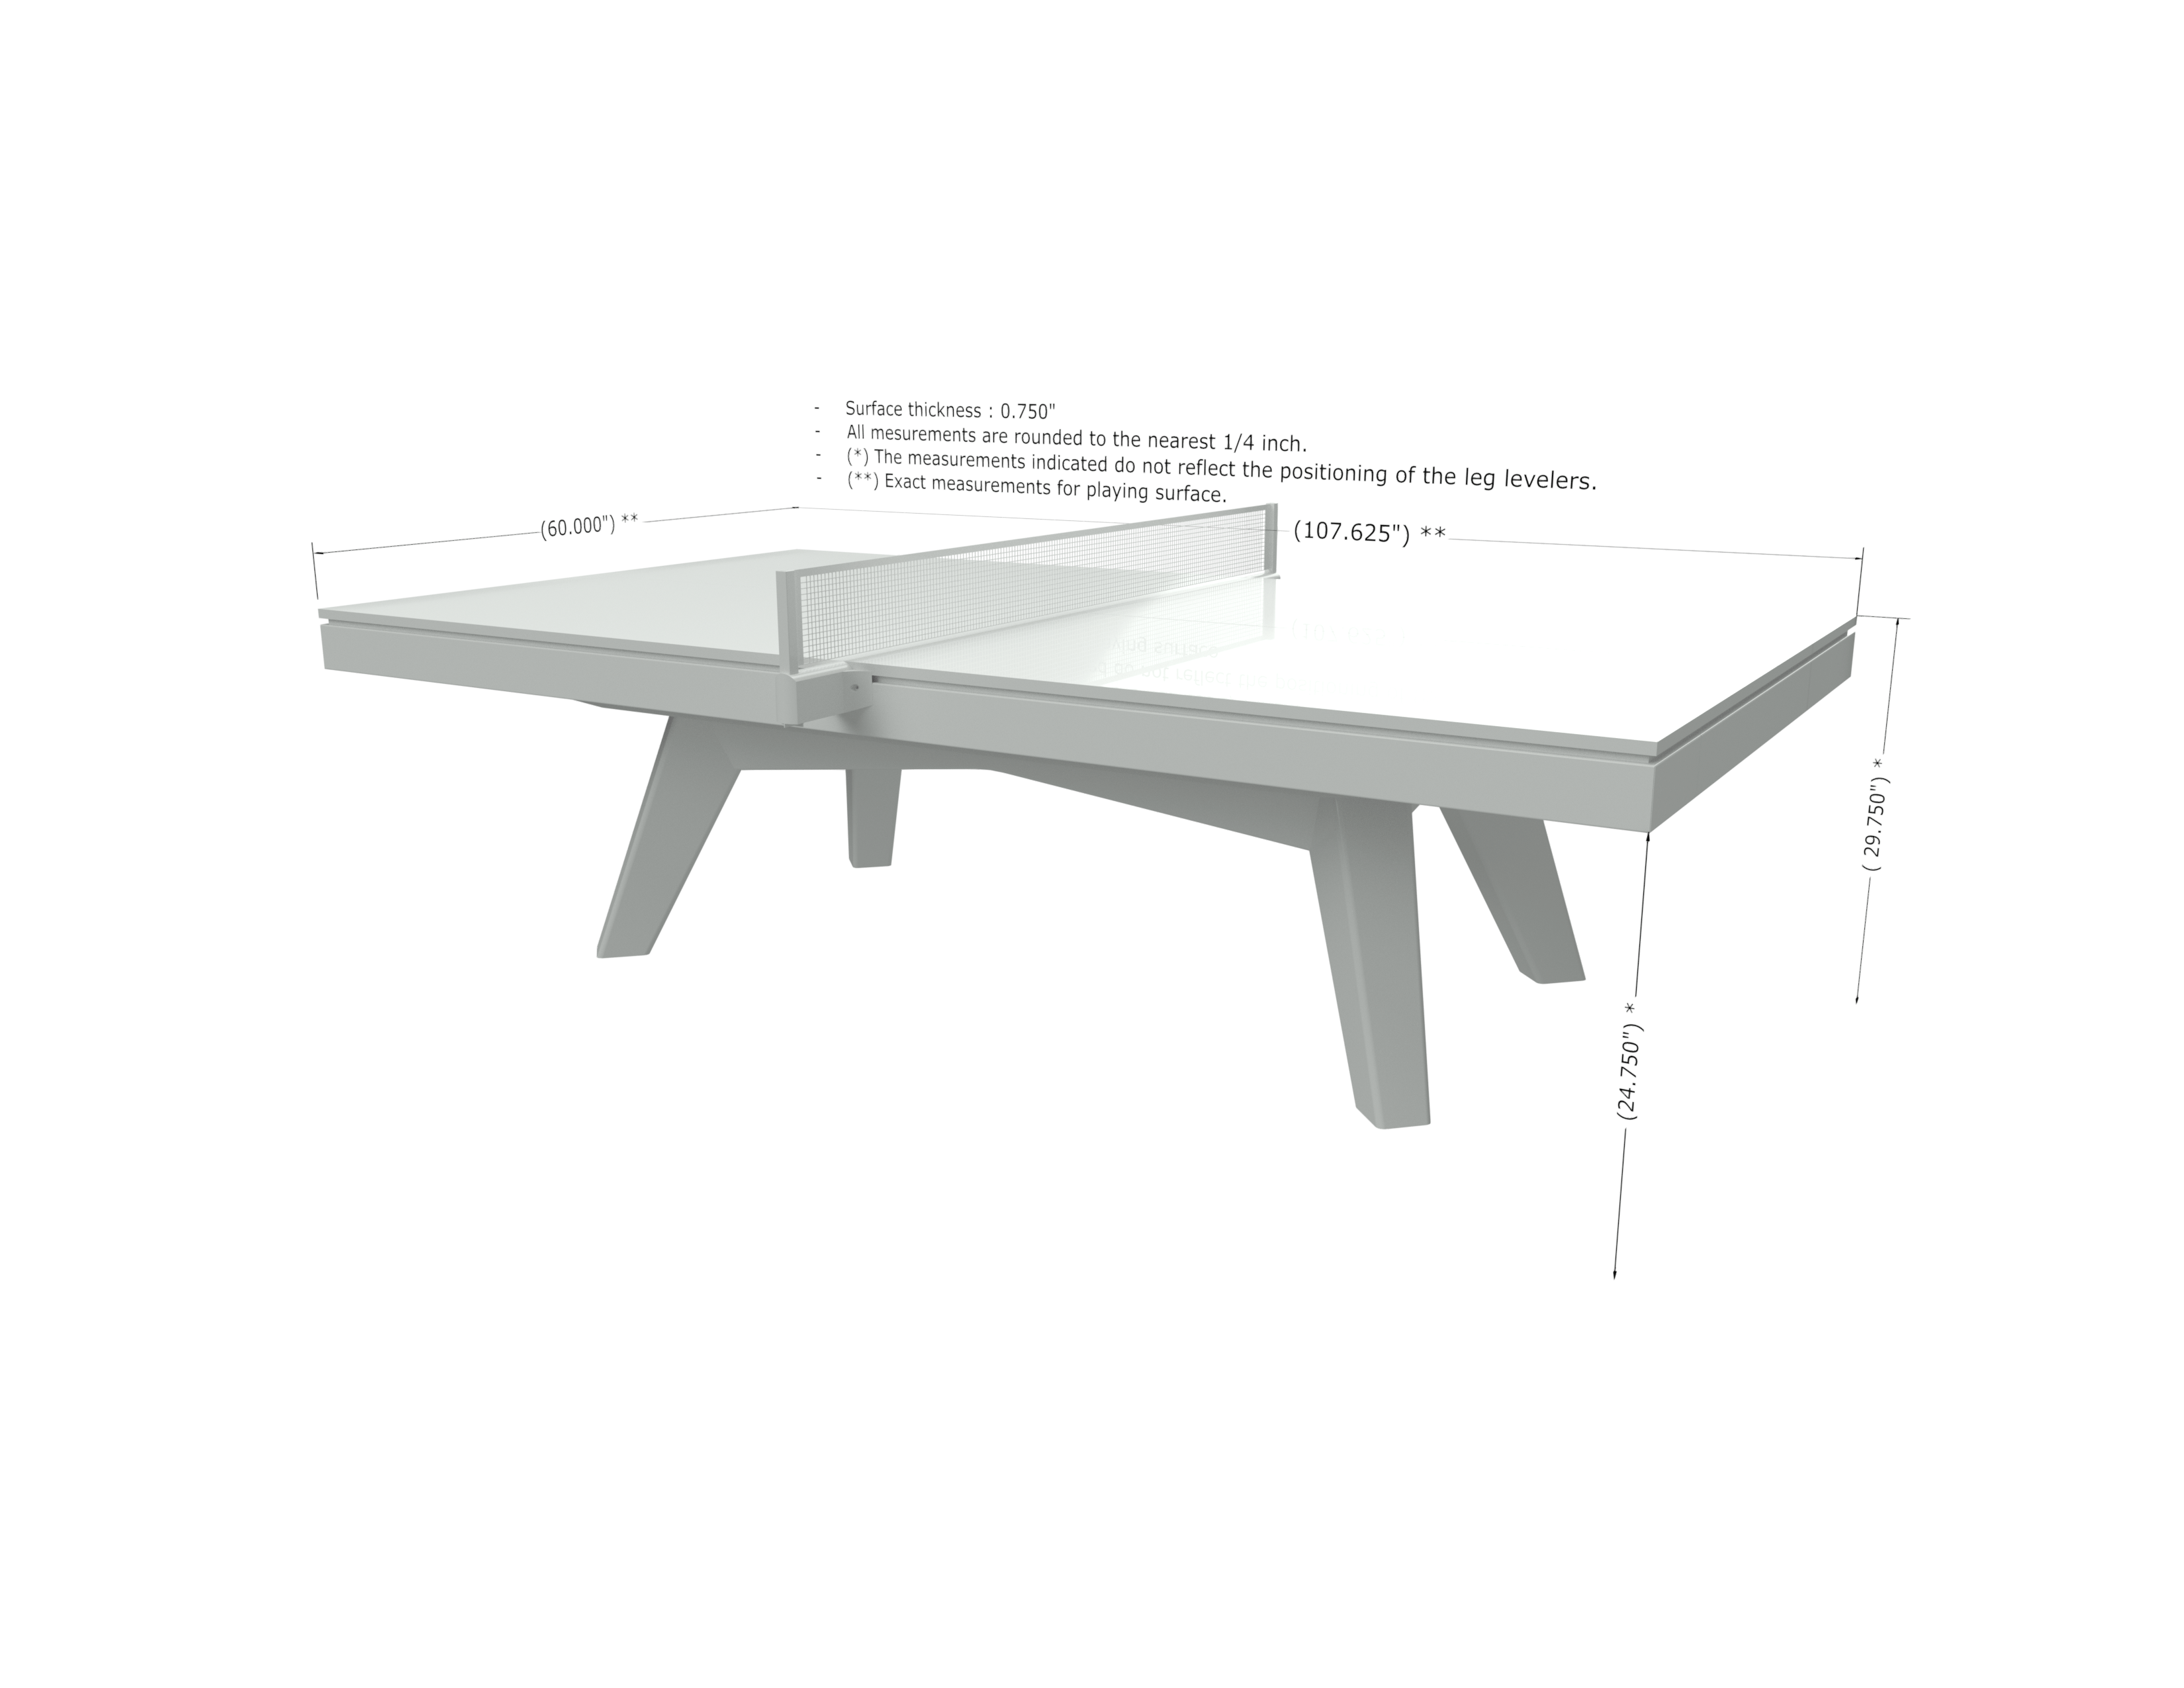 LUXX PING PONG TABLE